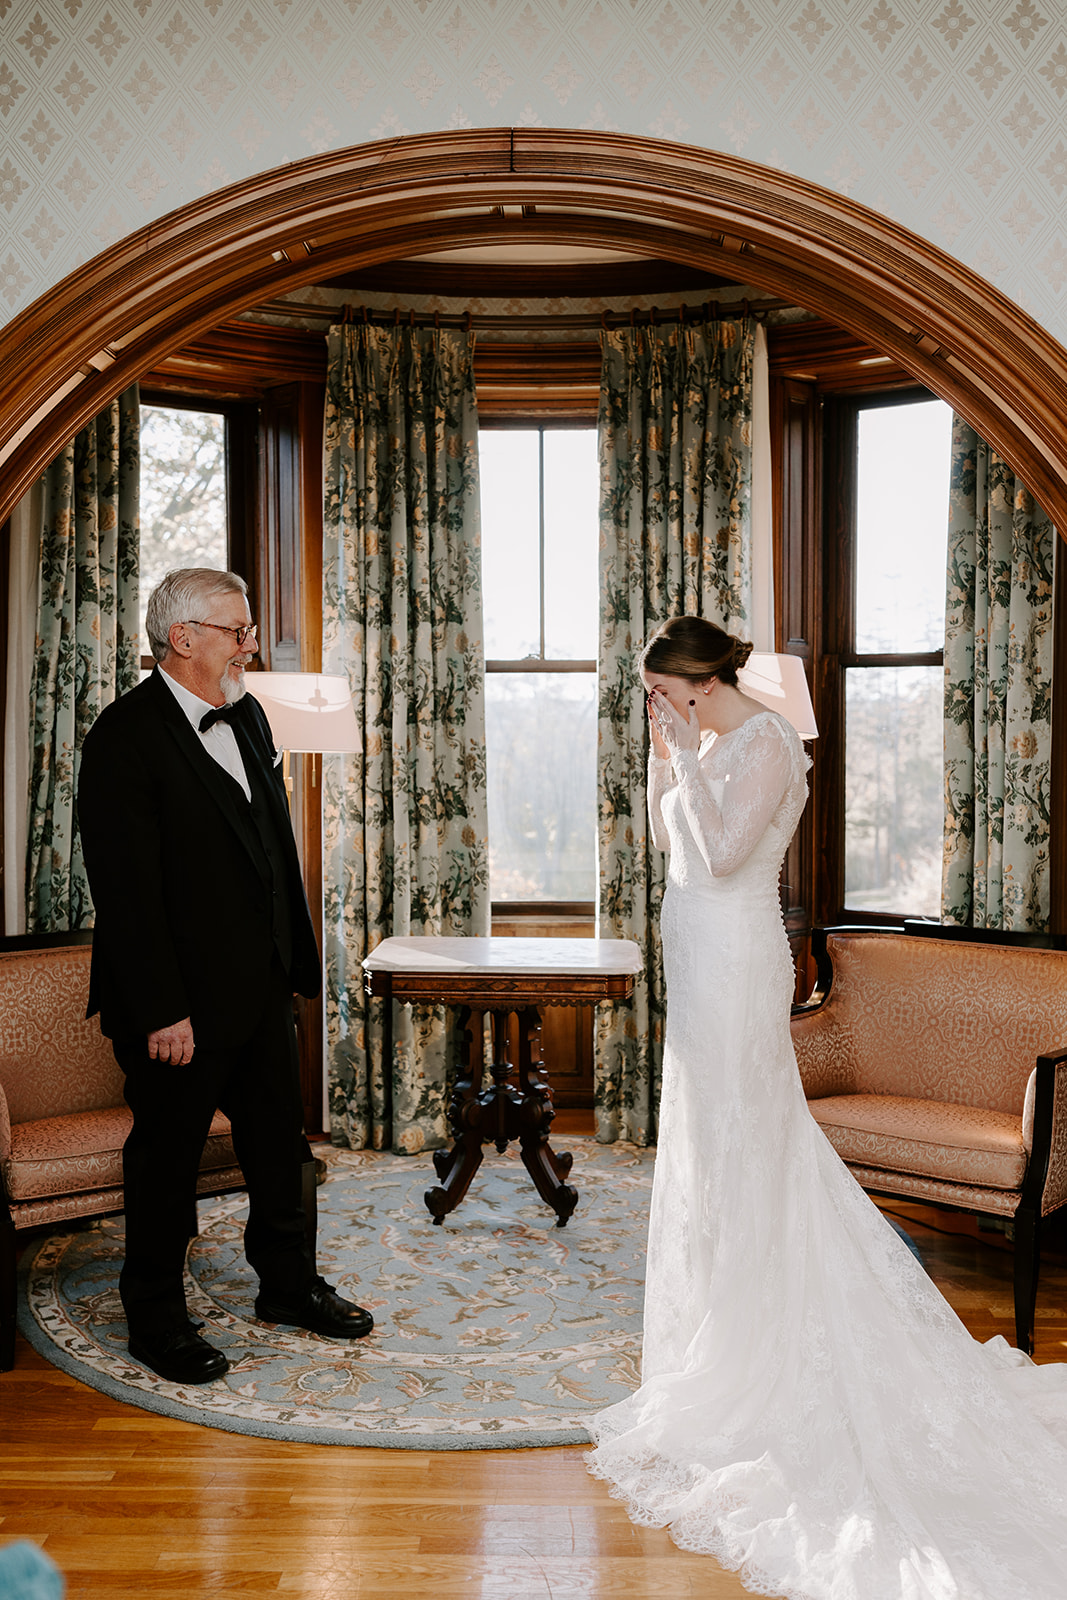 Stunning bride shares a moment with her dad on her wedding day